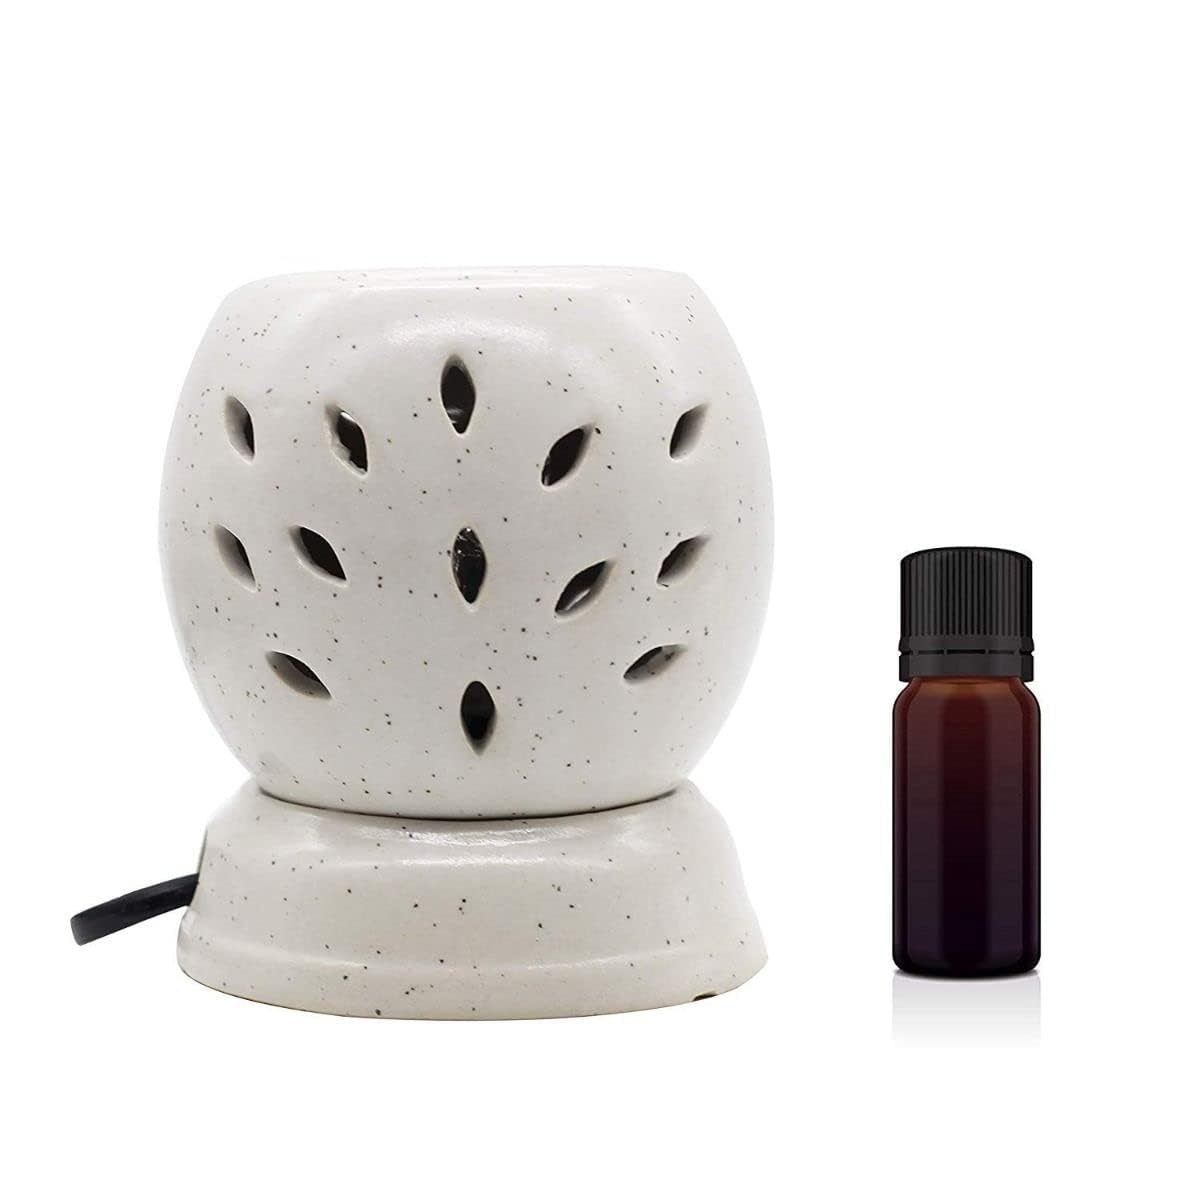 Ceramic Electric Aroma Diffuser | Round Shape Aromatherapy Oil Warmer cum Electric Lamp (White)